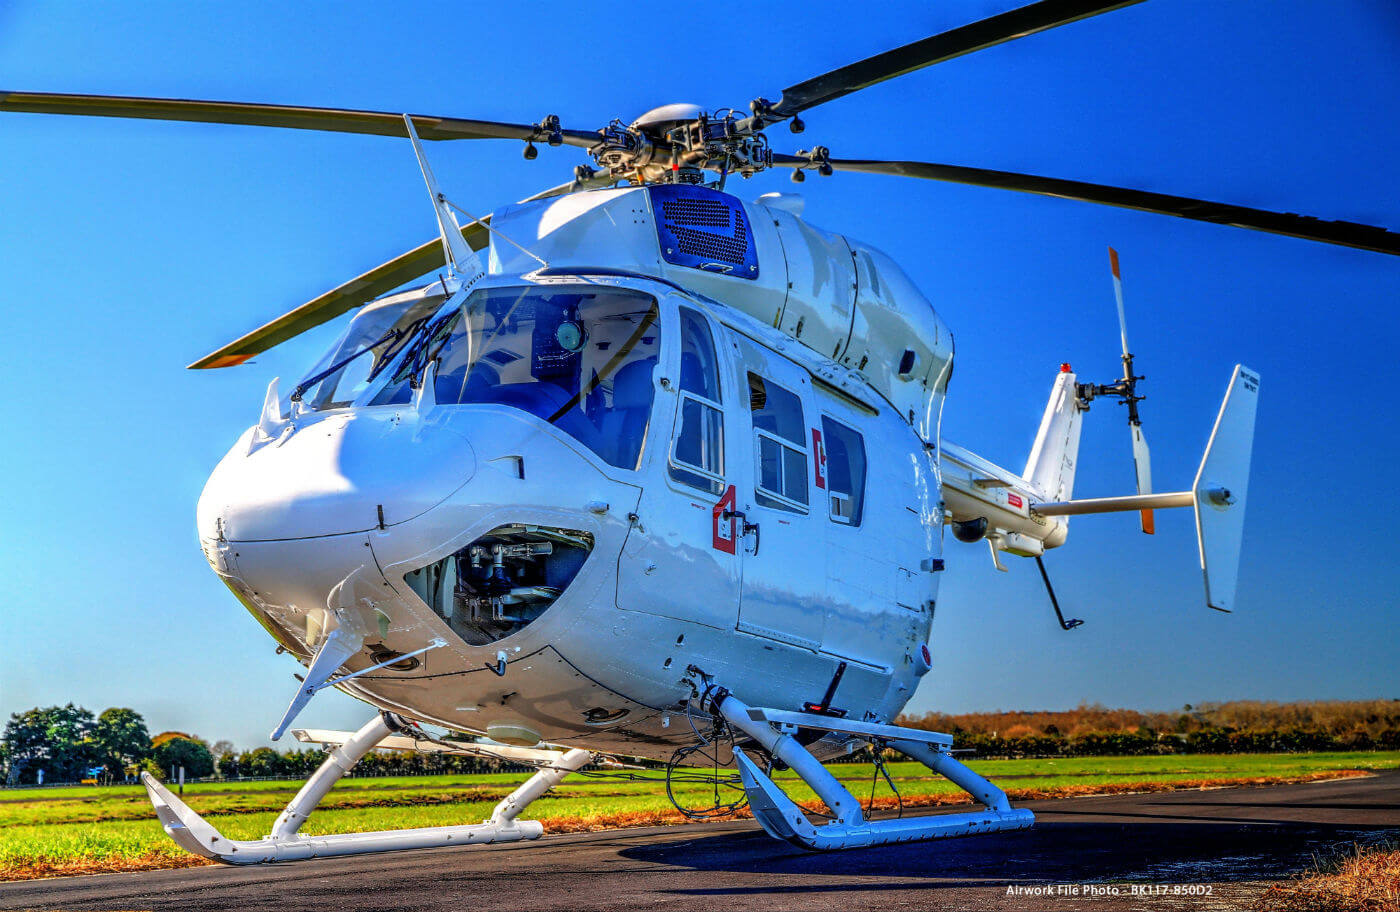 The BK117‐850D2 offers the operator an economical way to meet Category A/Class 1 requirements while dramatically enhancing the performance, safety and capabilities of the helicopter for the benefit of the operator, crew and its clients. Airwork Photo